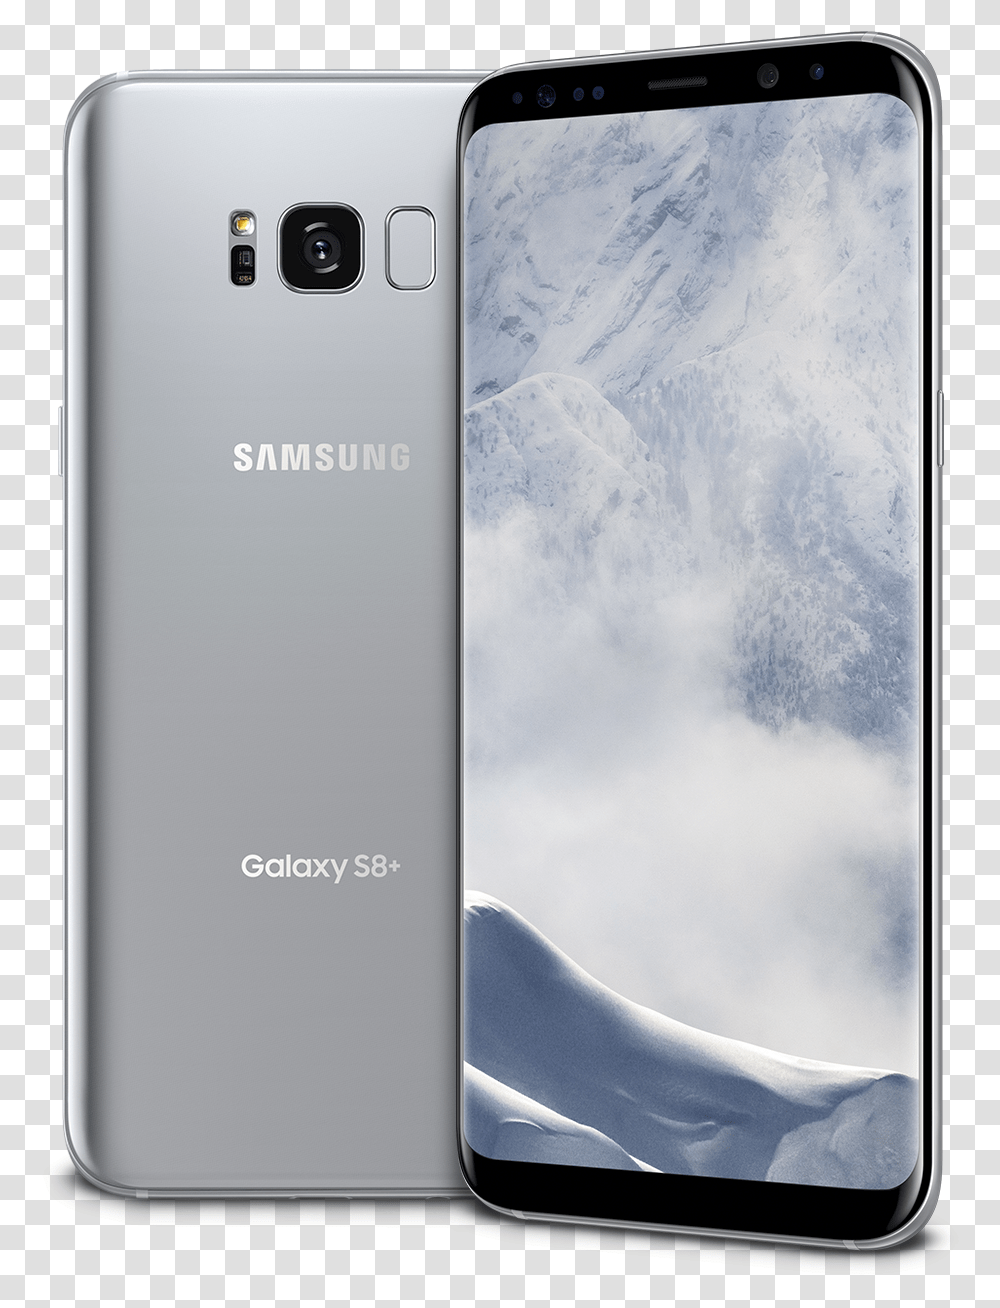 Samsung Galaxy S8 Samsung S8 Plus Price In Pakistan, Mobile Phone, Electronics, Cell Phone, Iphone Transparent Png